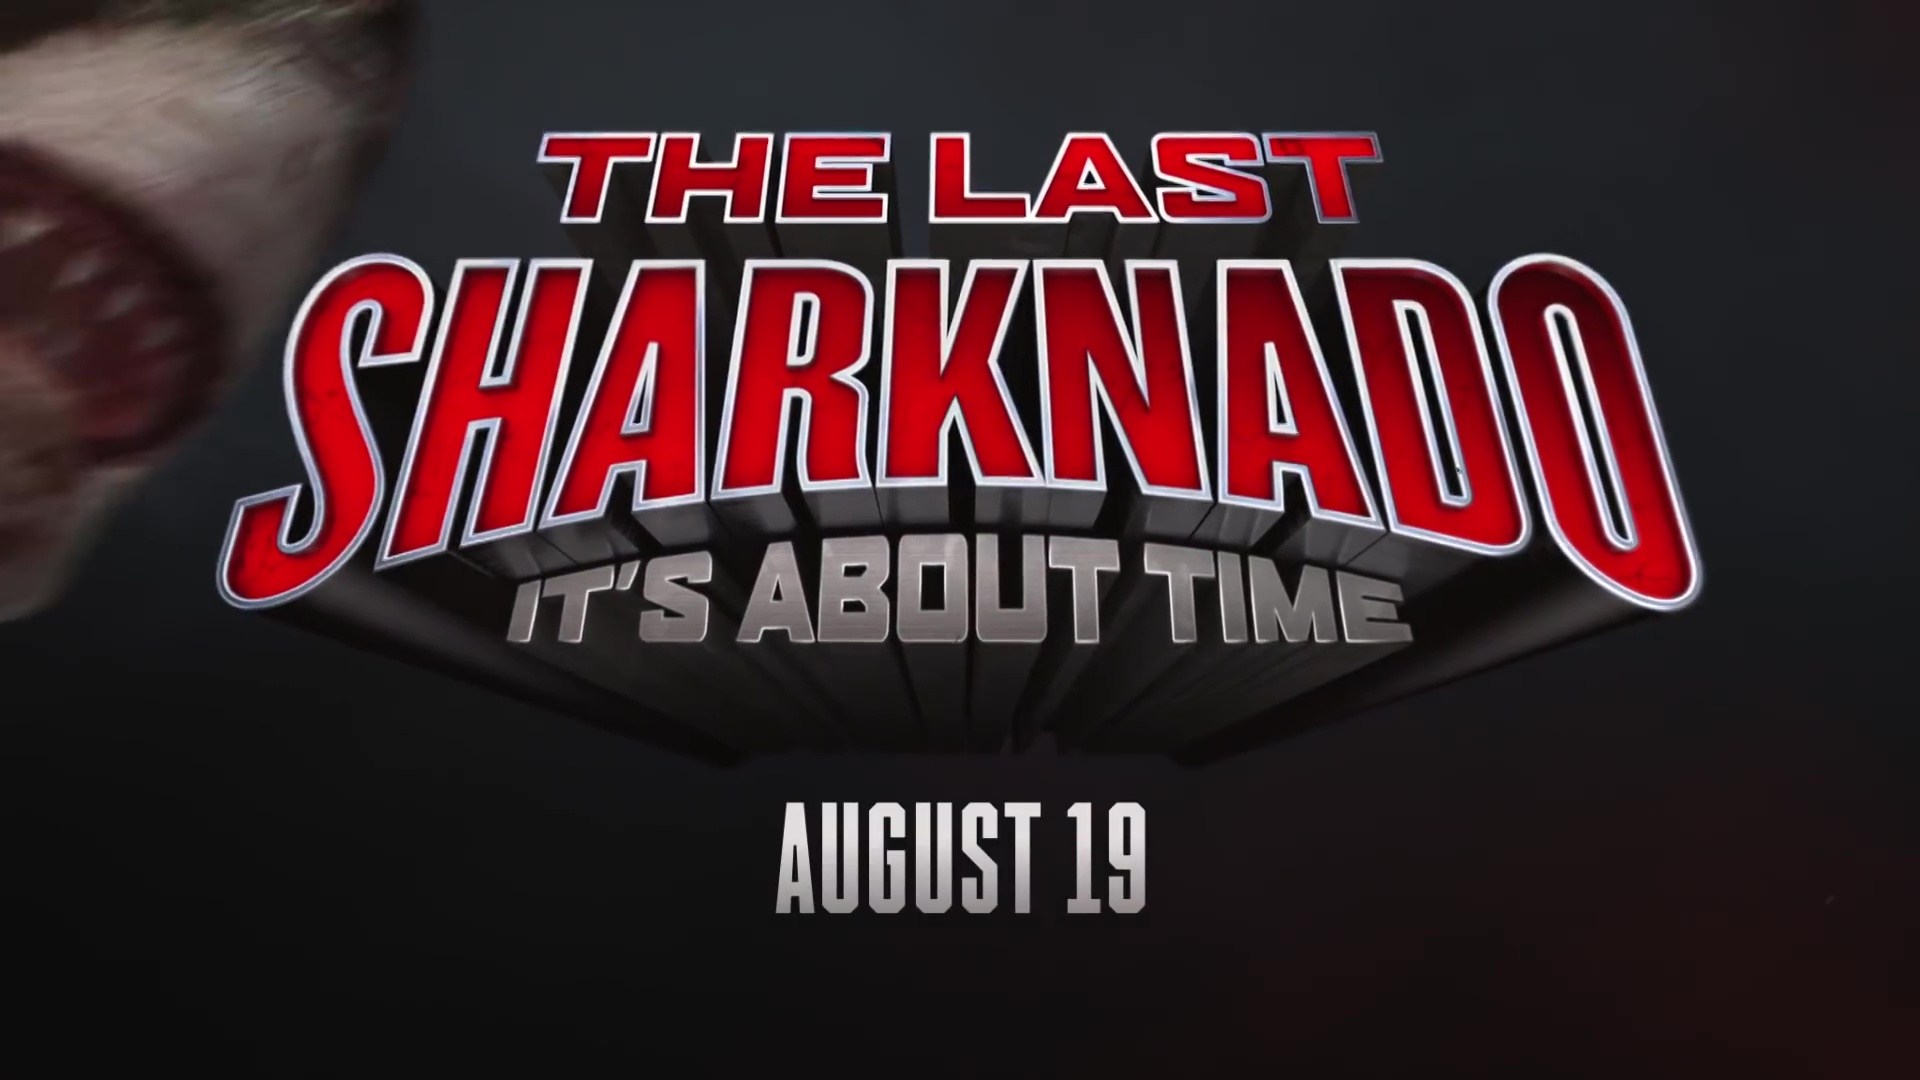 The-Last-Sharknado-It_s-About-Time-movie wide